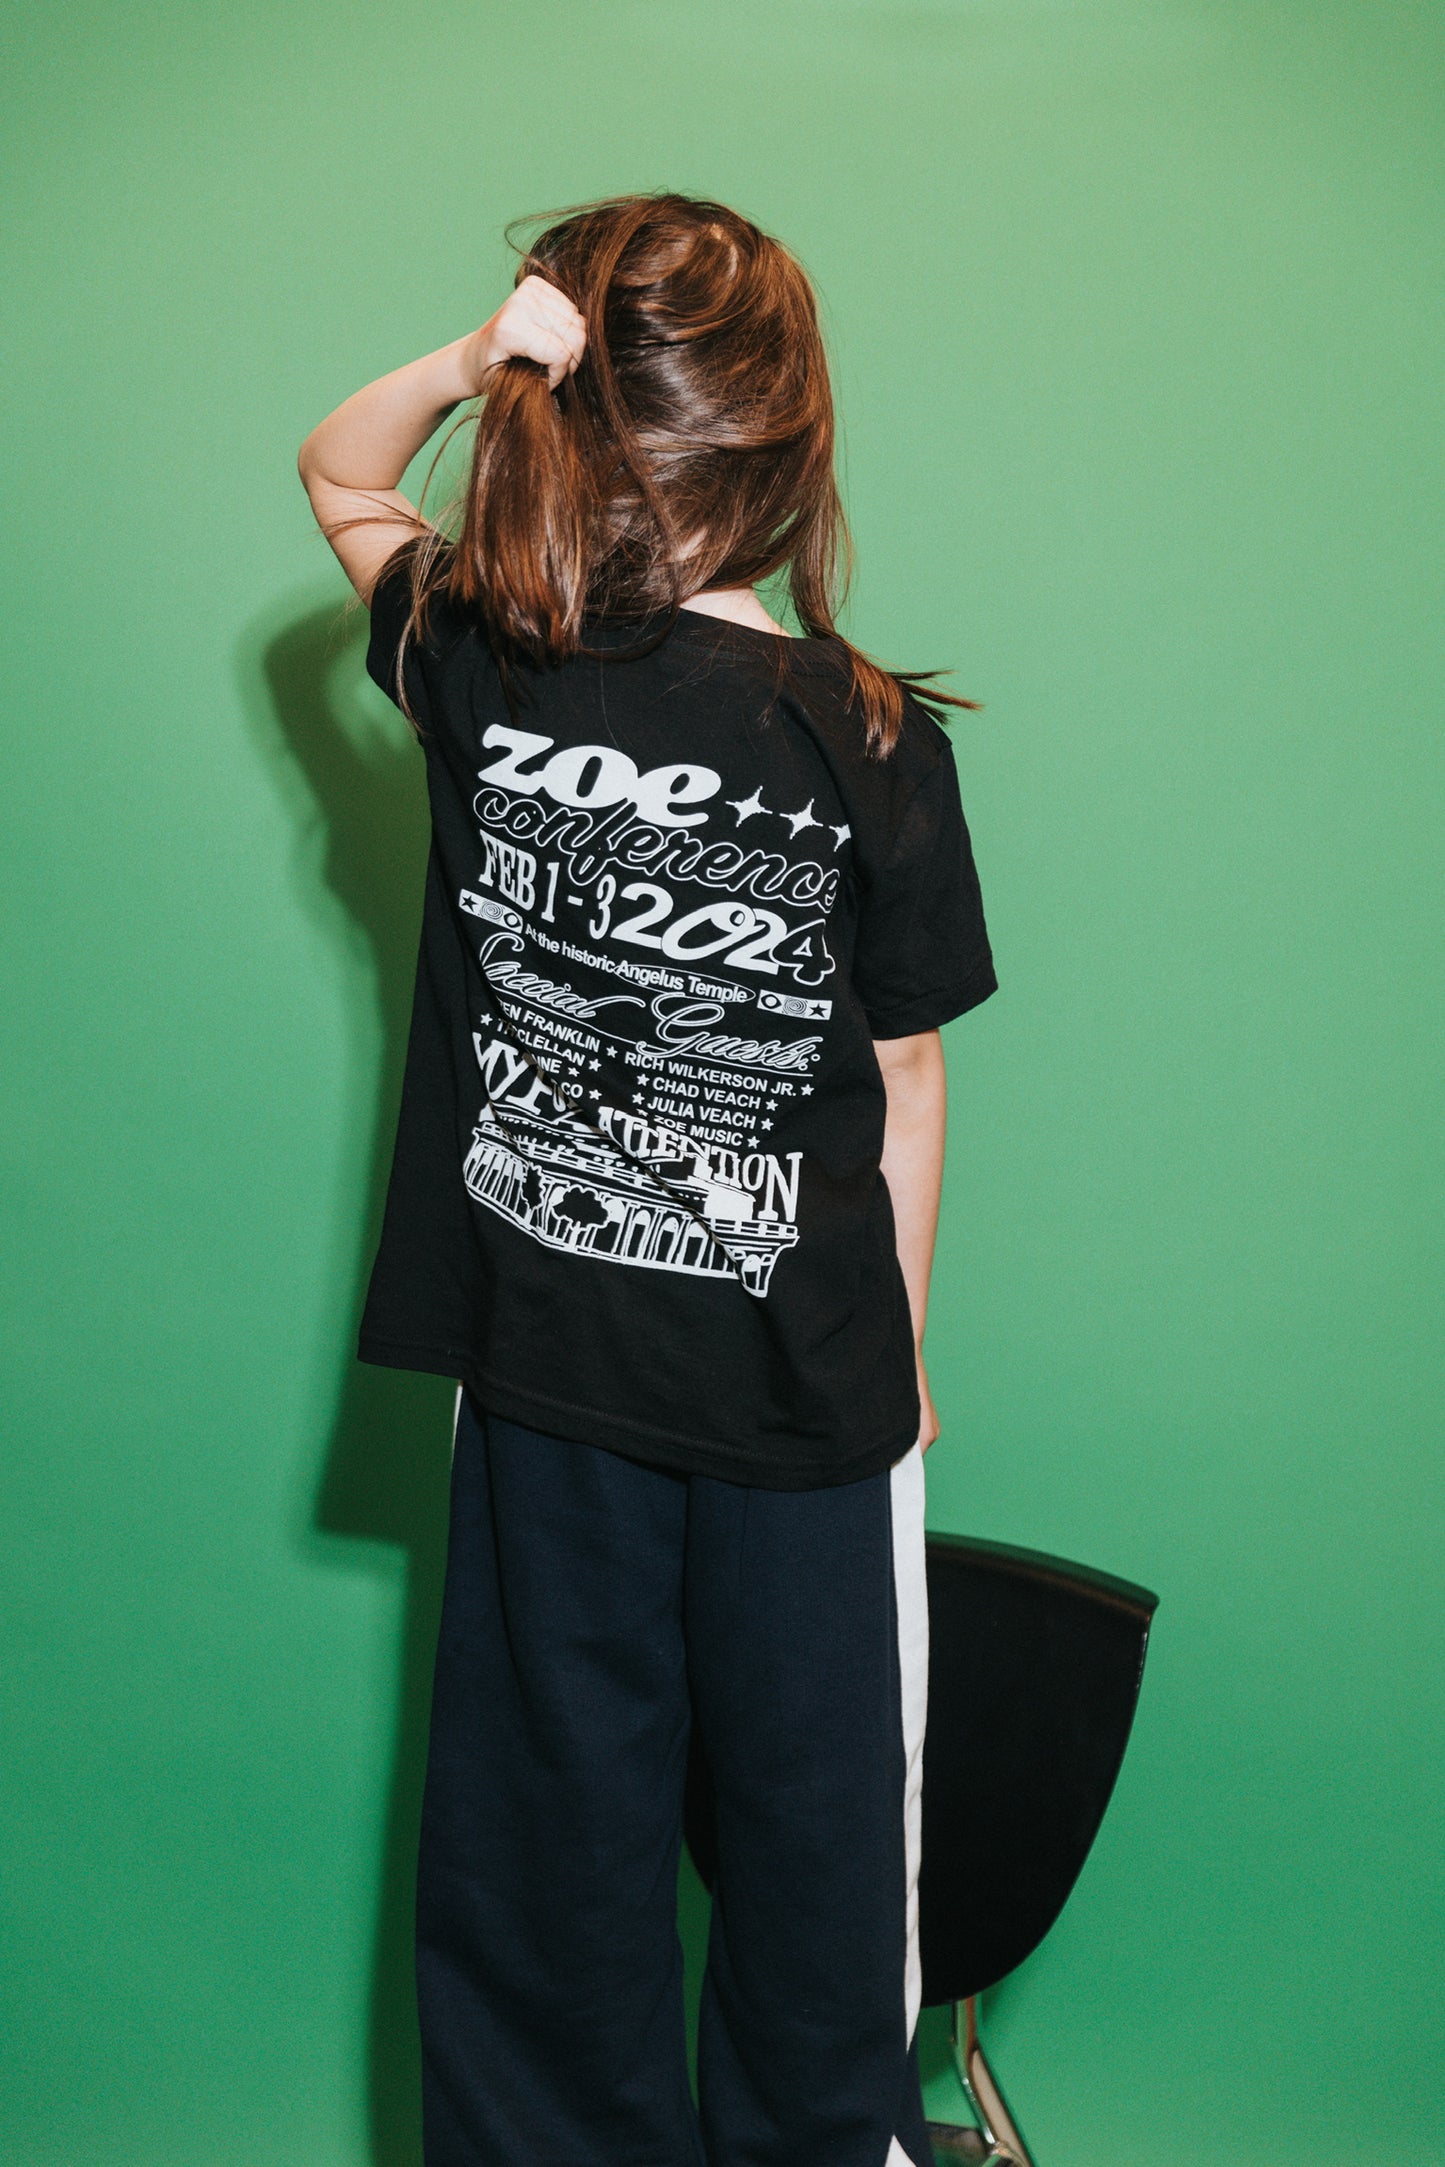 ZOE CONF 24 | Kids Conference Tee - Black